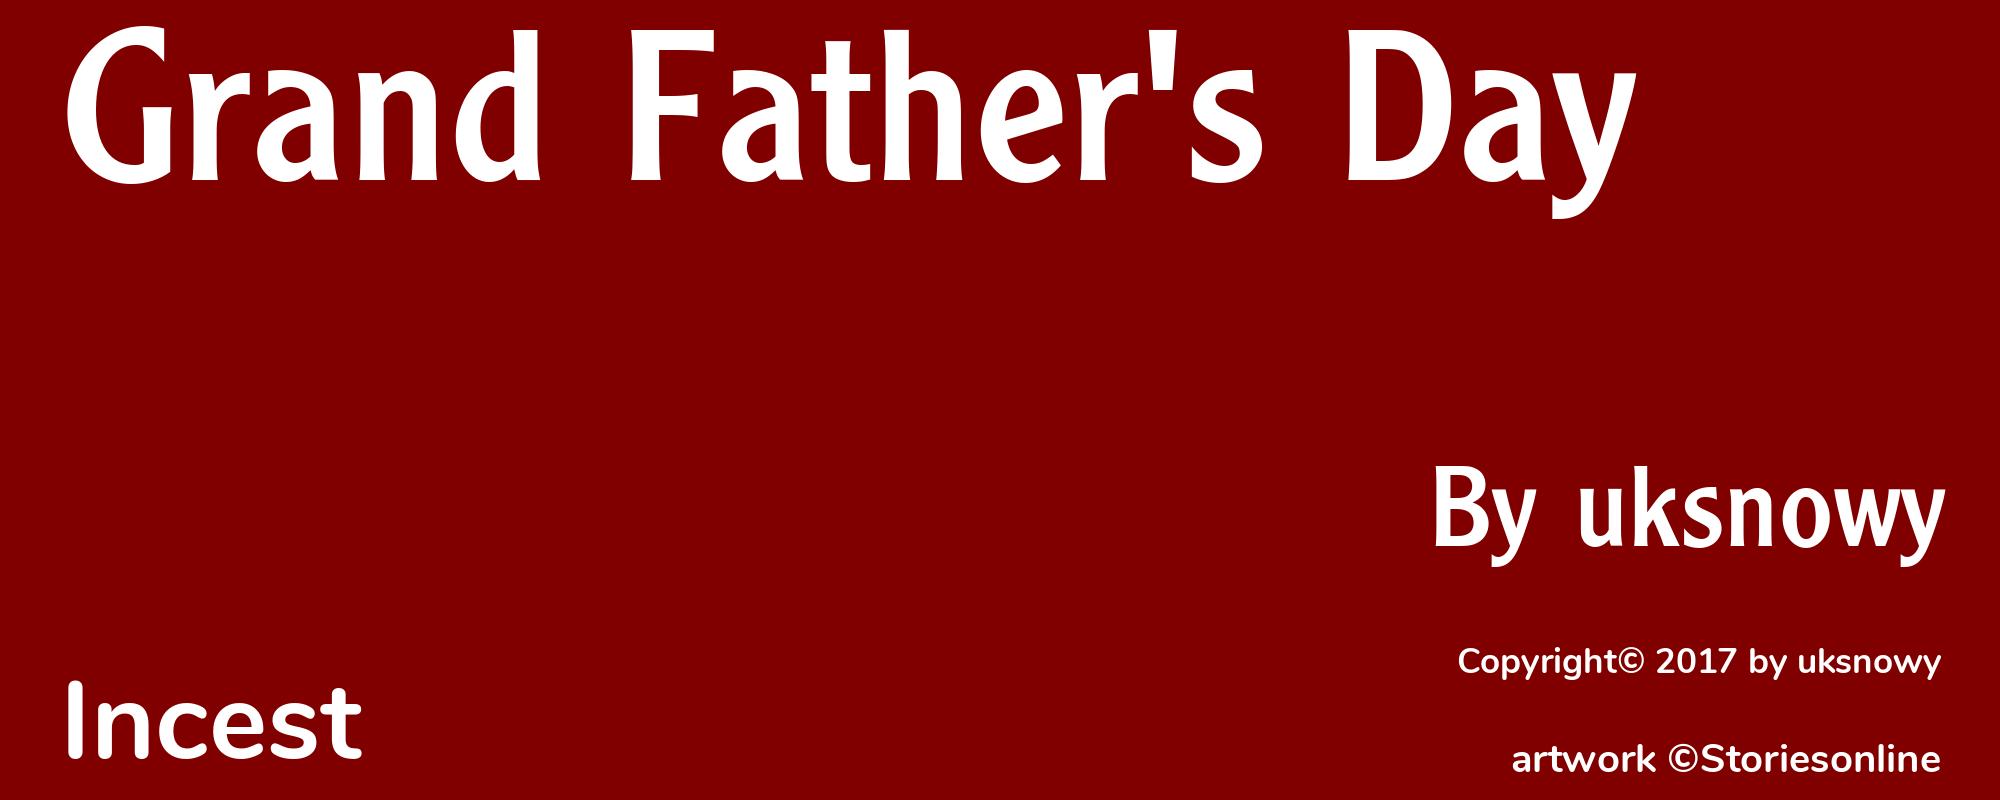 Grand Father's Day - Cover